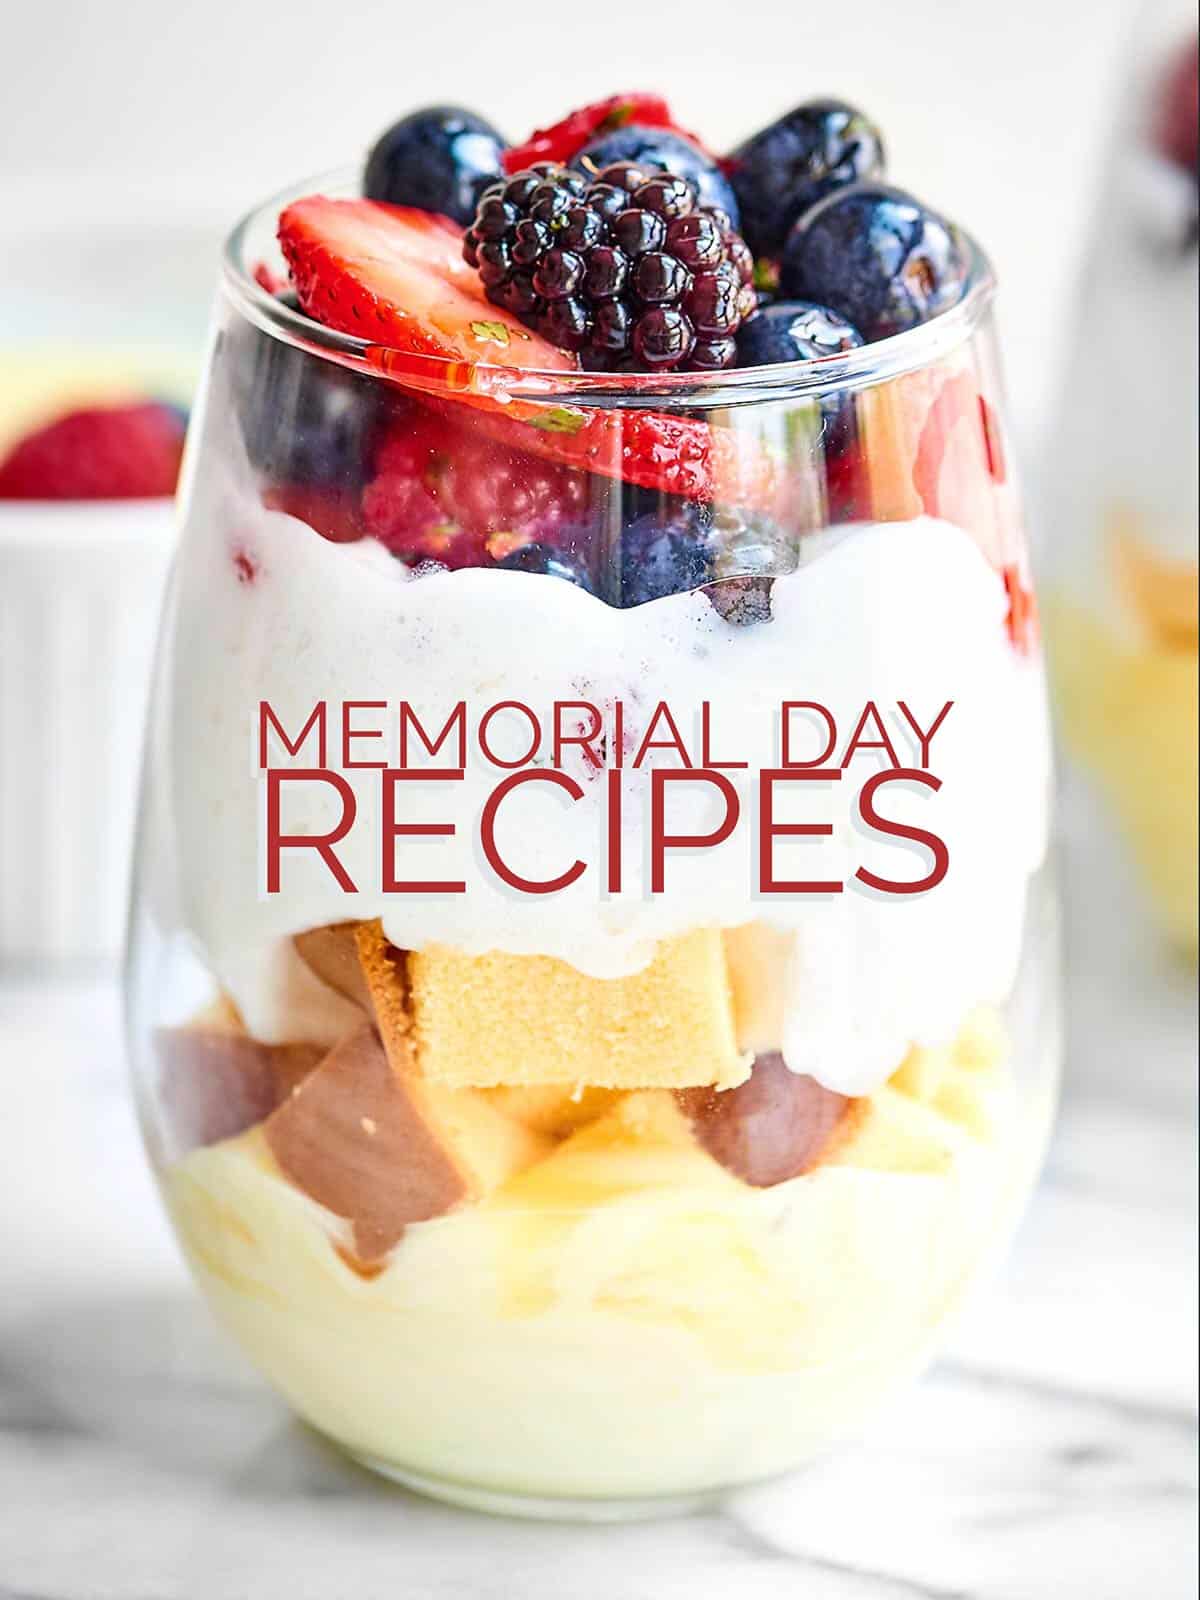 Memorial Day is *almost* here, so I've gathered up all my favorite salads, grilling, dessert, and drink recipes to help us celebrate! showmetheyummy.com